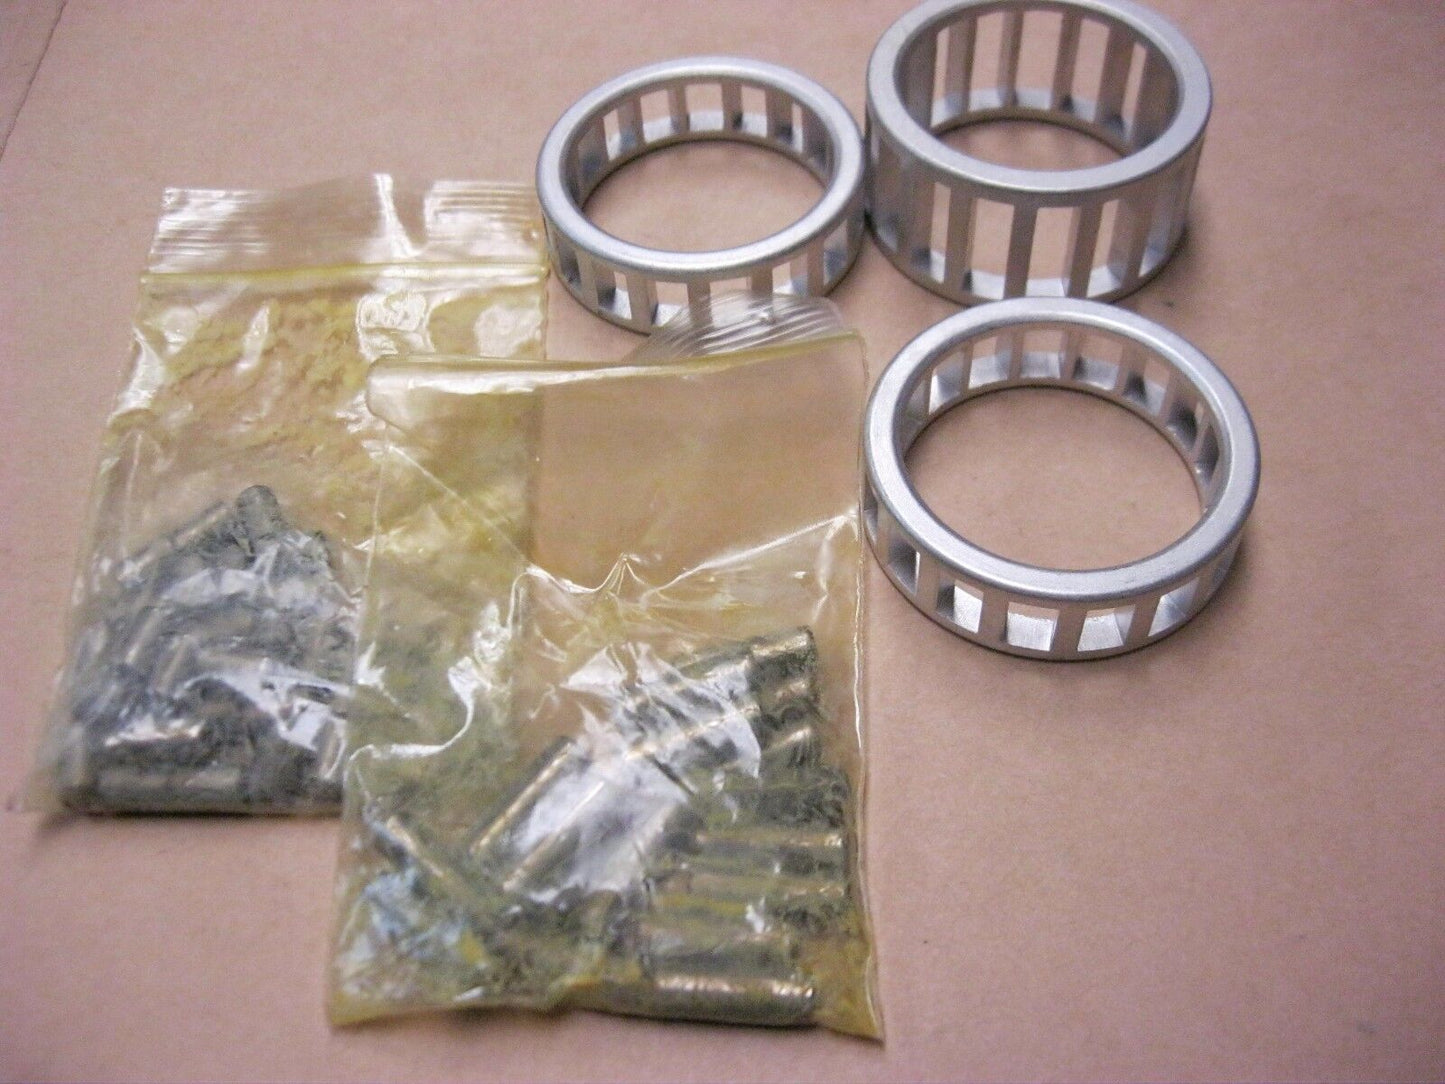 PRESTON CYCLE BEARINGS AND CAGES .0002 FITS BIG TWIN 41-86 (OEM 24386-40B) 15011